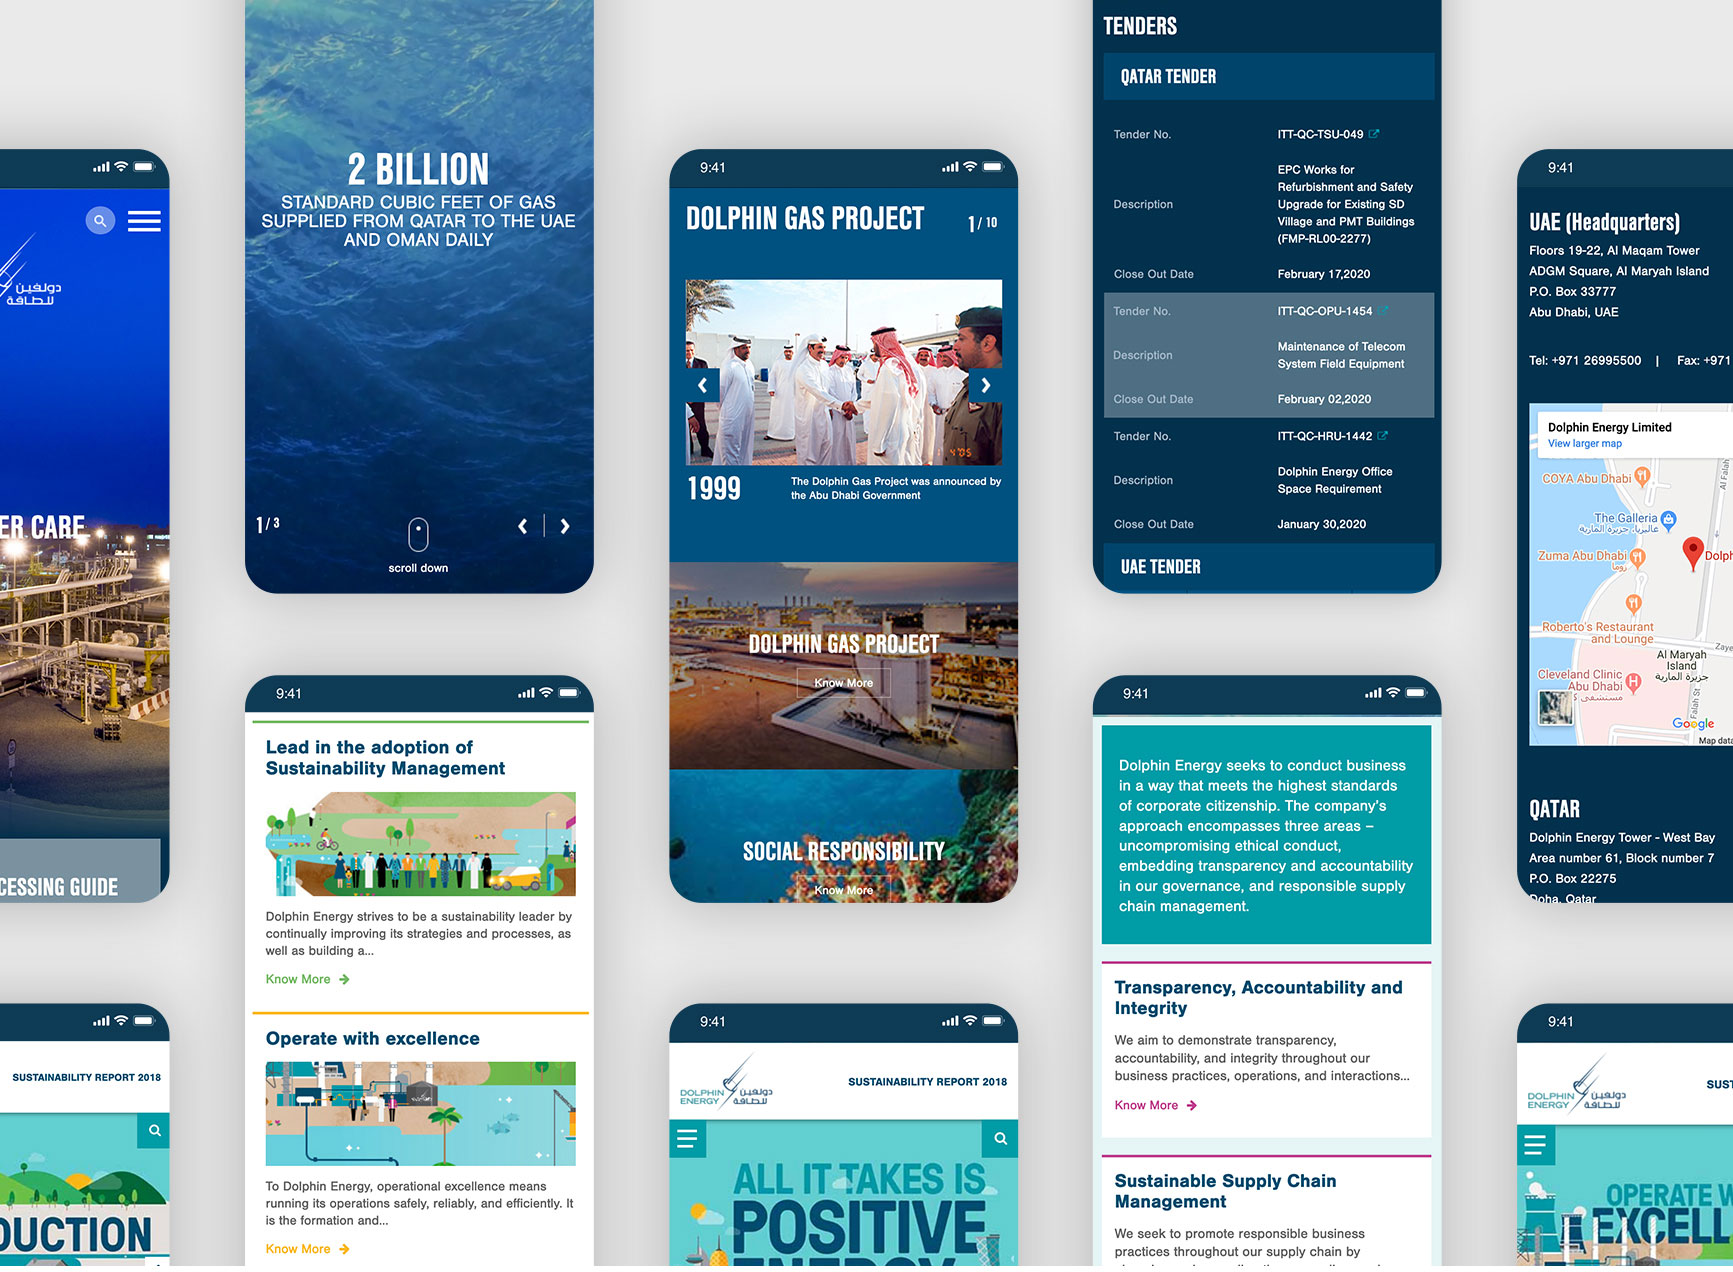 Dolphin Energy website by GTECH